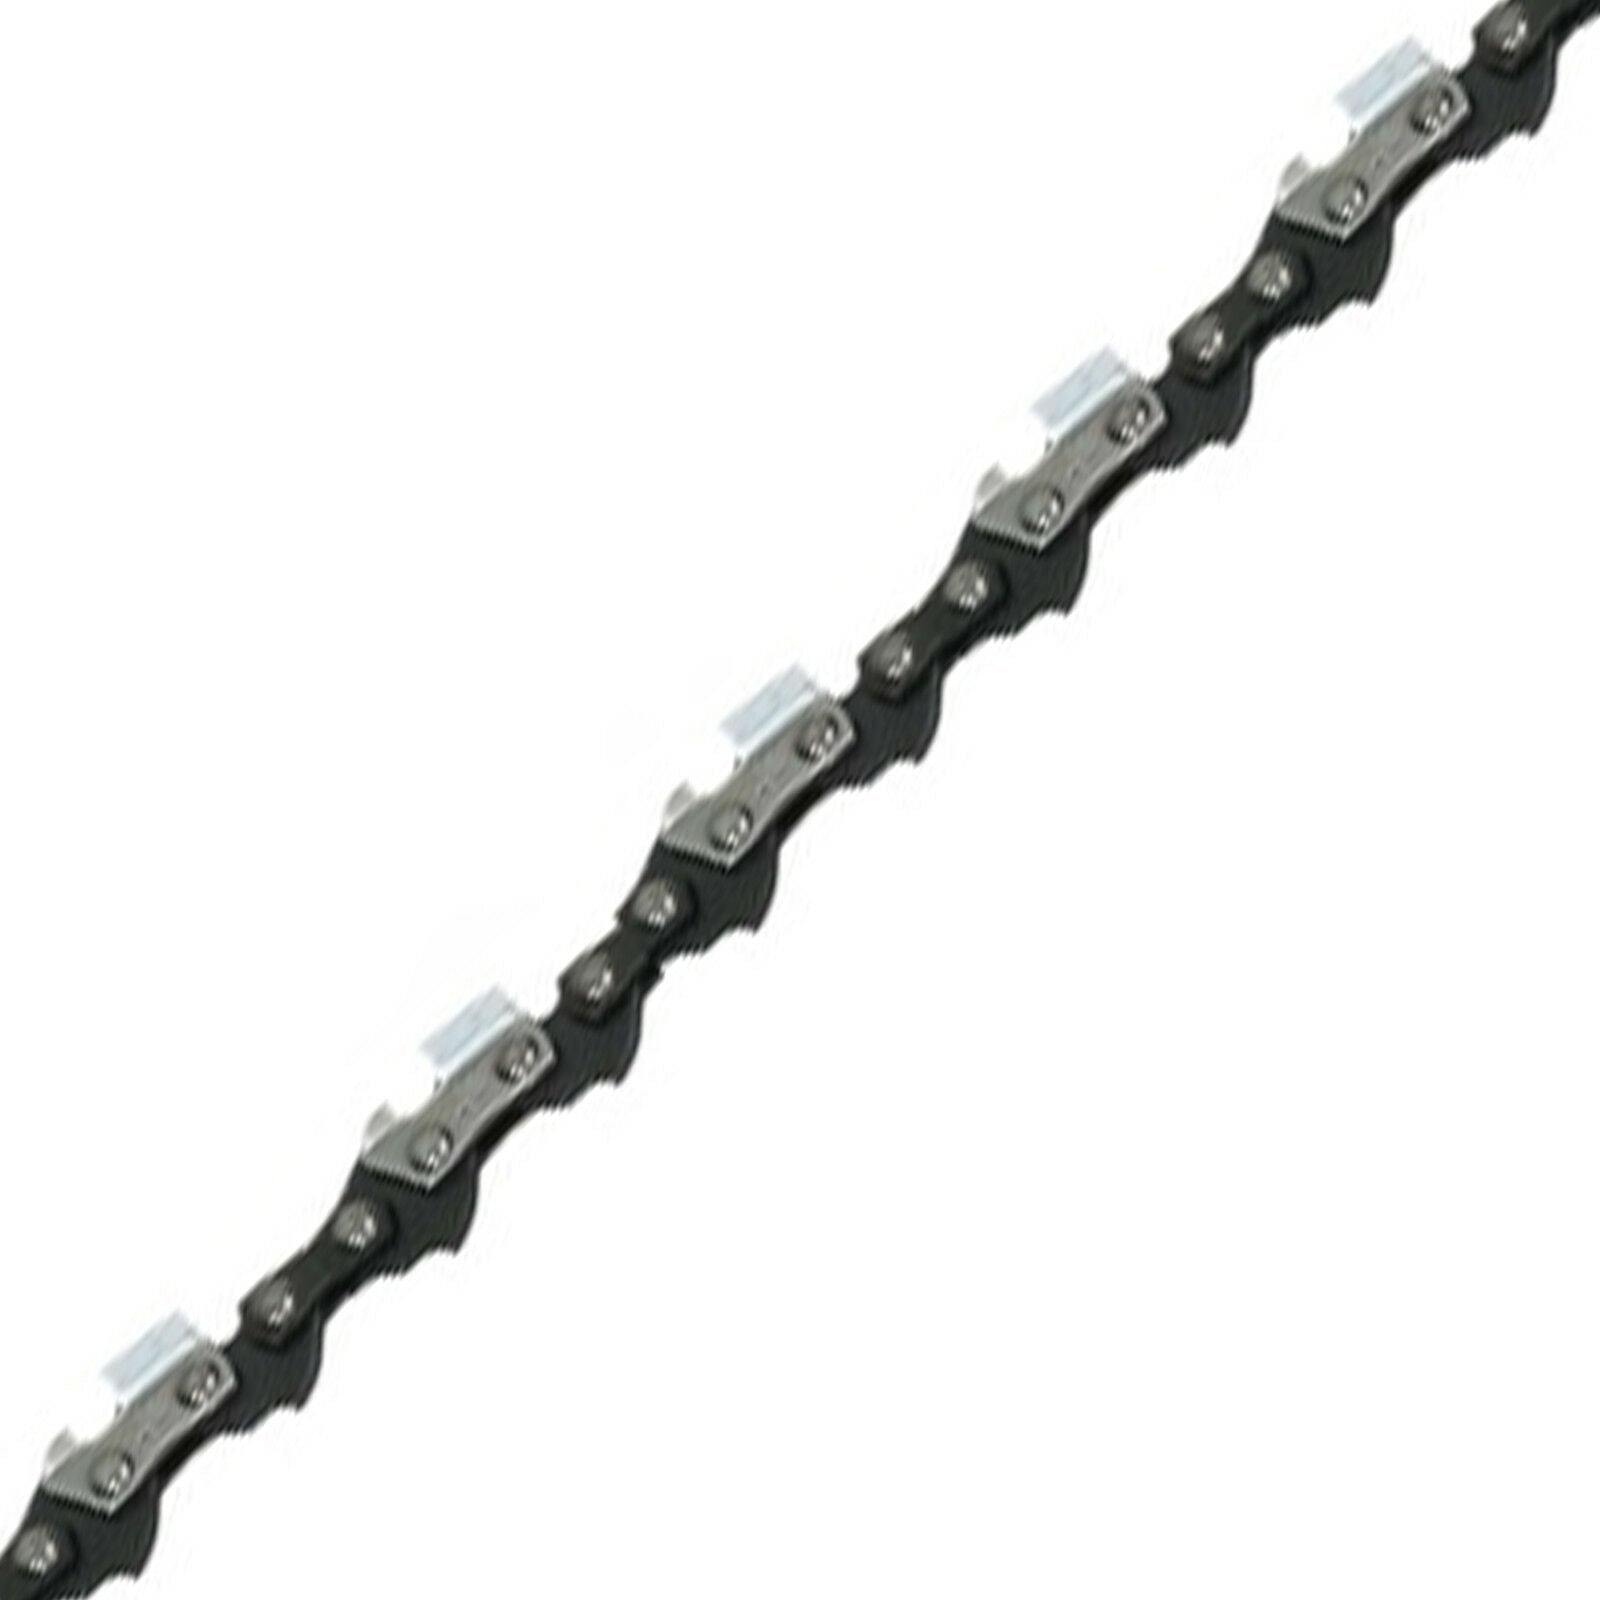 16" Low Kickback Semi Chisel Bar Saw Chain for SOVEREIGN Chainsaw 57 Drive Links